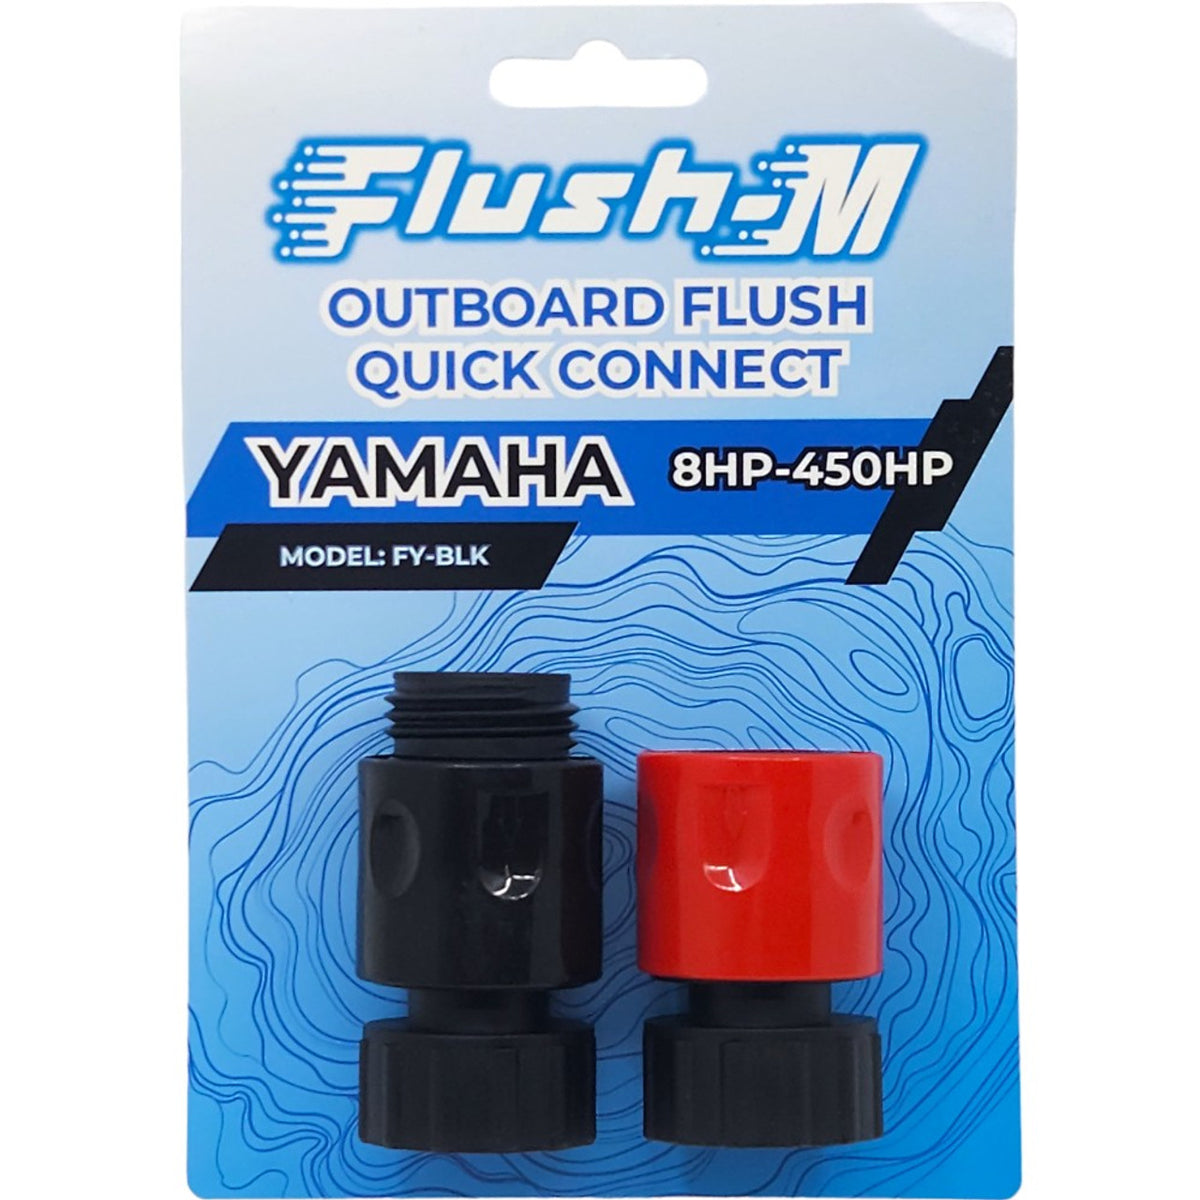 Outboard Flush Quick Connect Yamaha 8HP-450HP